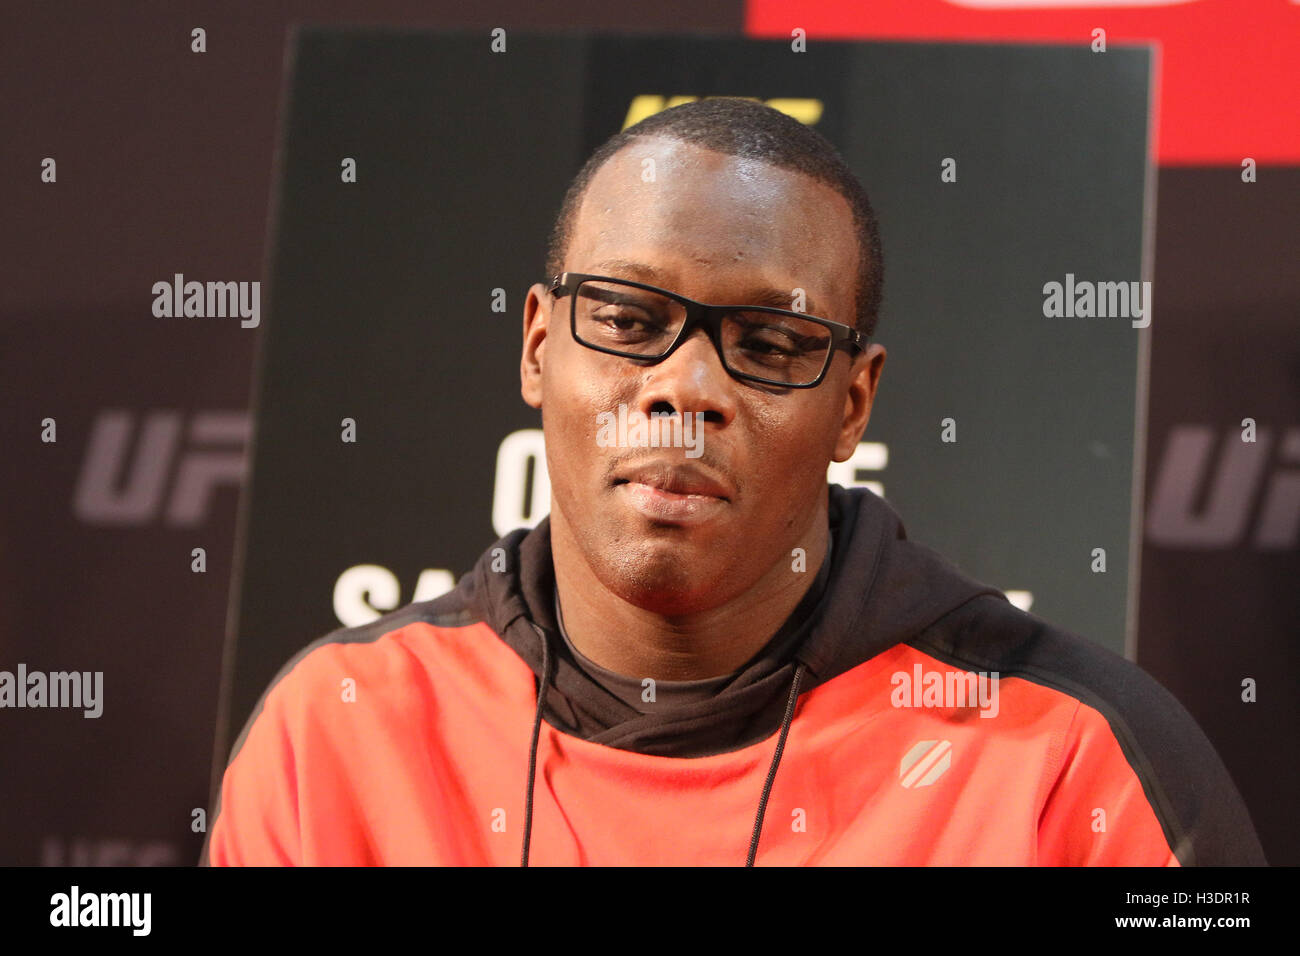 Manchester, UK. 6th October, 2016. UFC 204 - Media Day at Arena Manchester. Thursday the 6 of Oct. 2016 Ovince Saint Preux answers media questions ahead of UFC 204.   Credit:  Dan Cooke/Alamy Live News Stock Photo